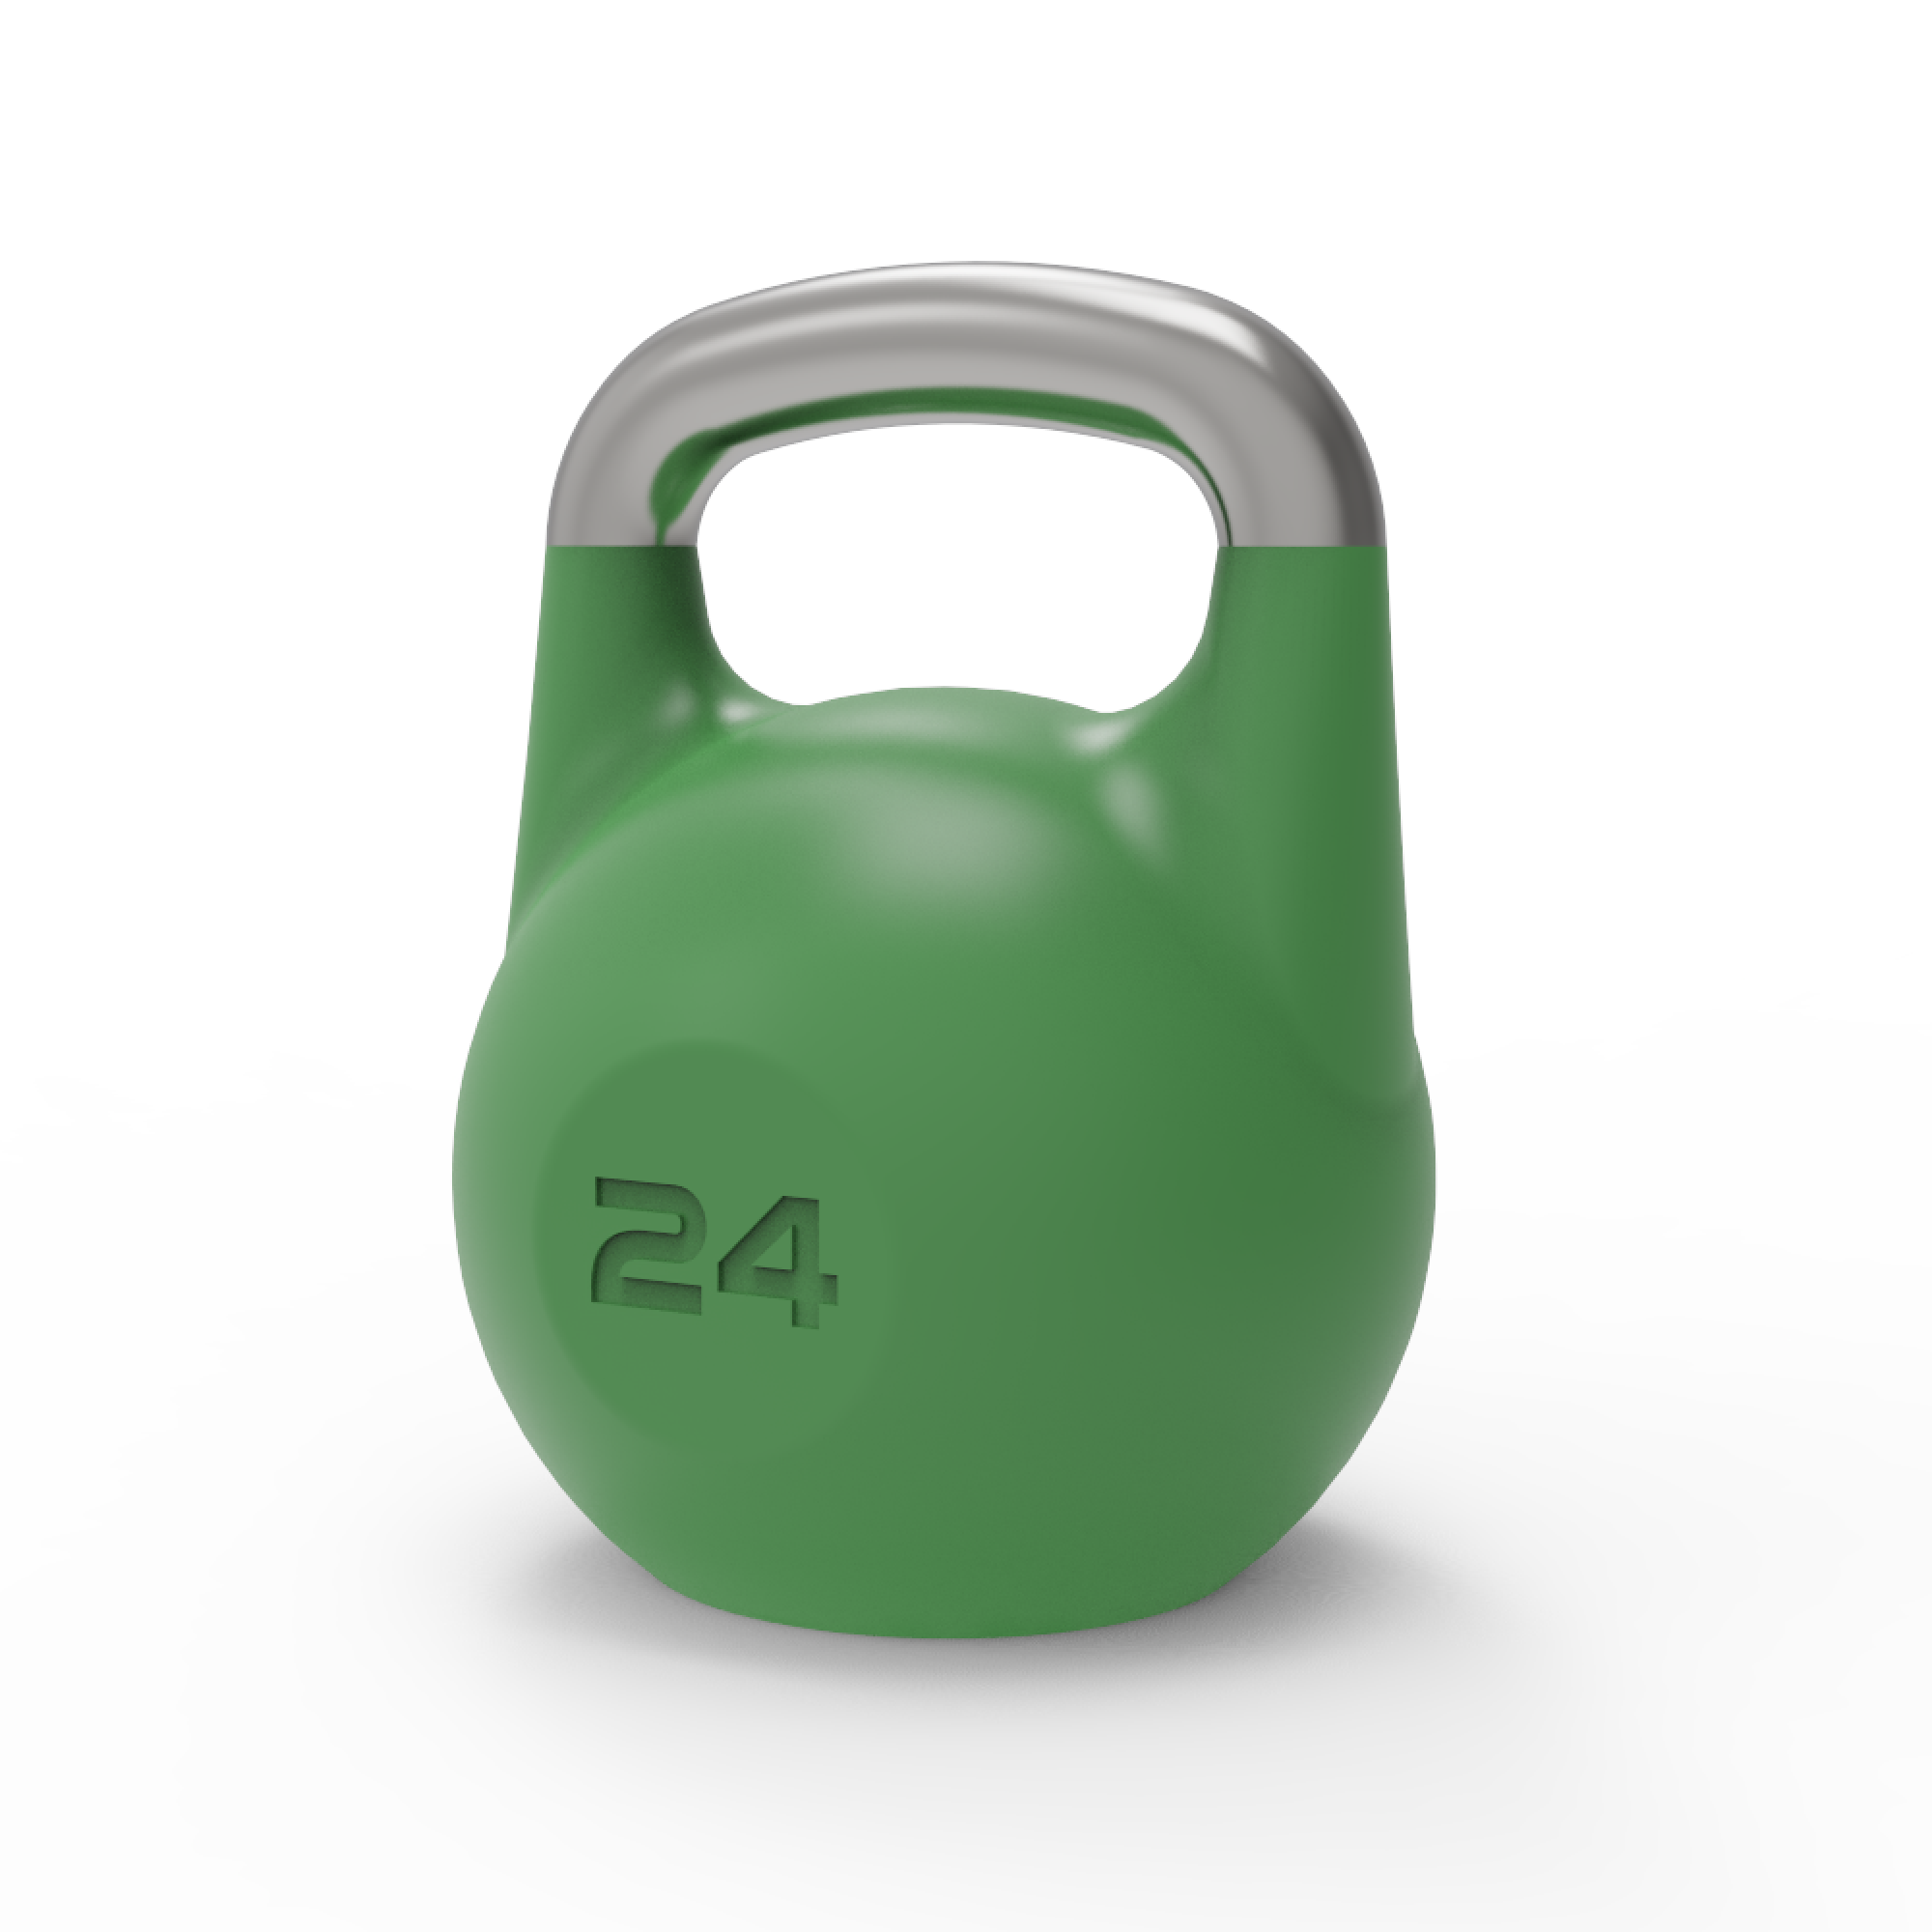 STEEL COMPETITION KETTLEBELLS – METCON FAMILY